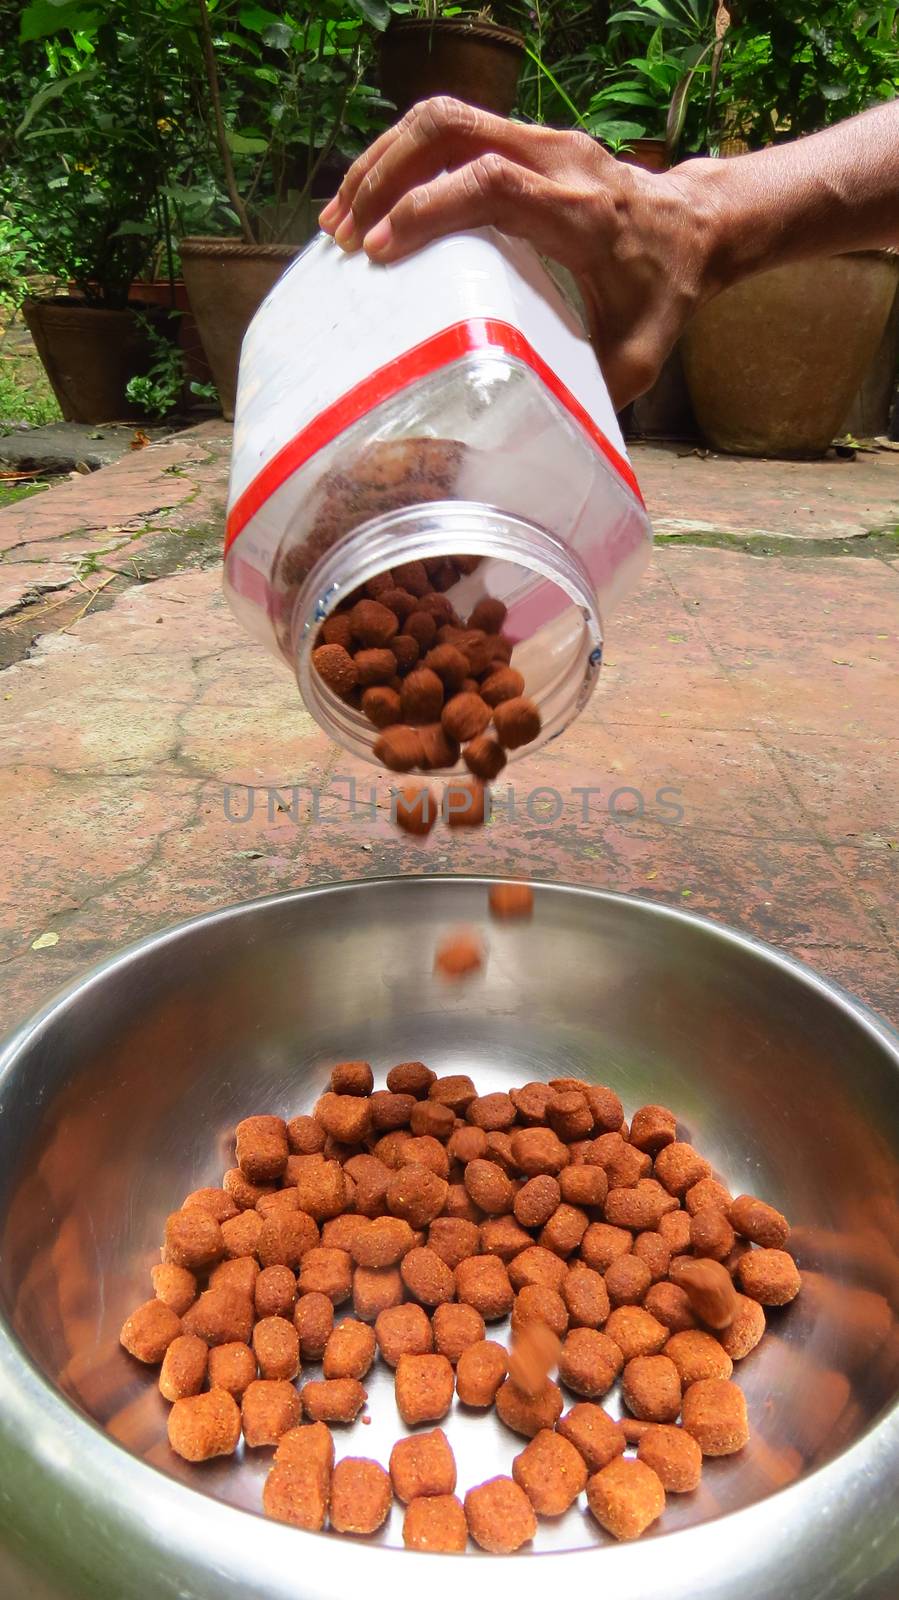 A person pouring pet food in a bowl from a dog's perspective                               